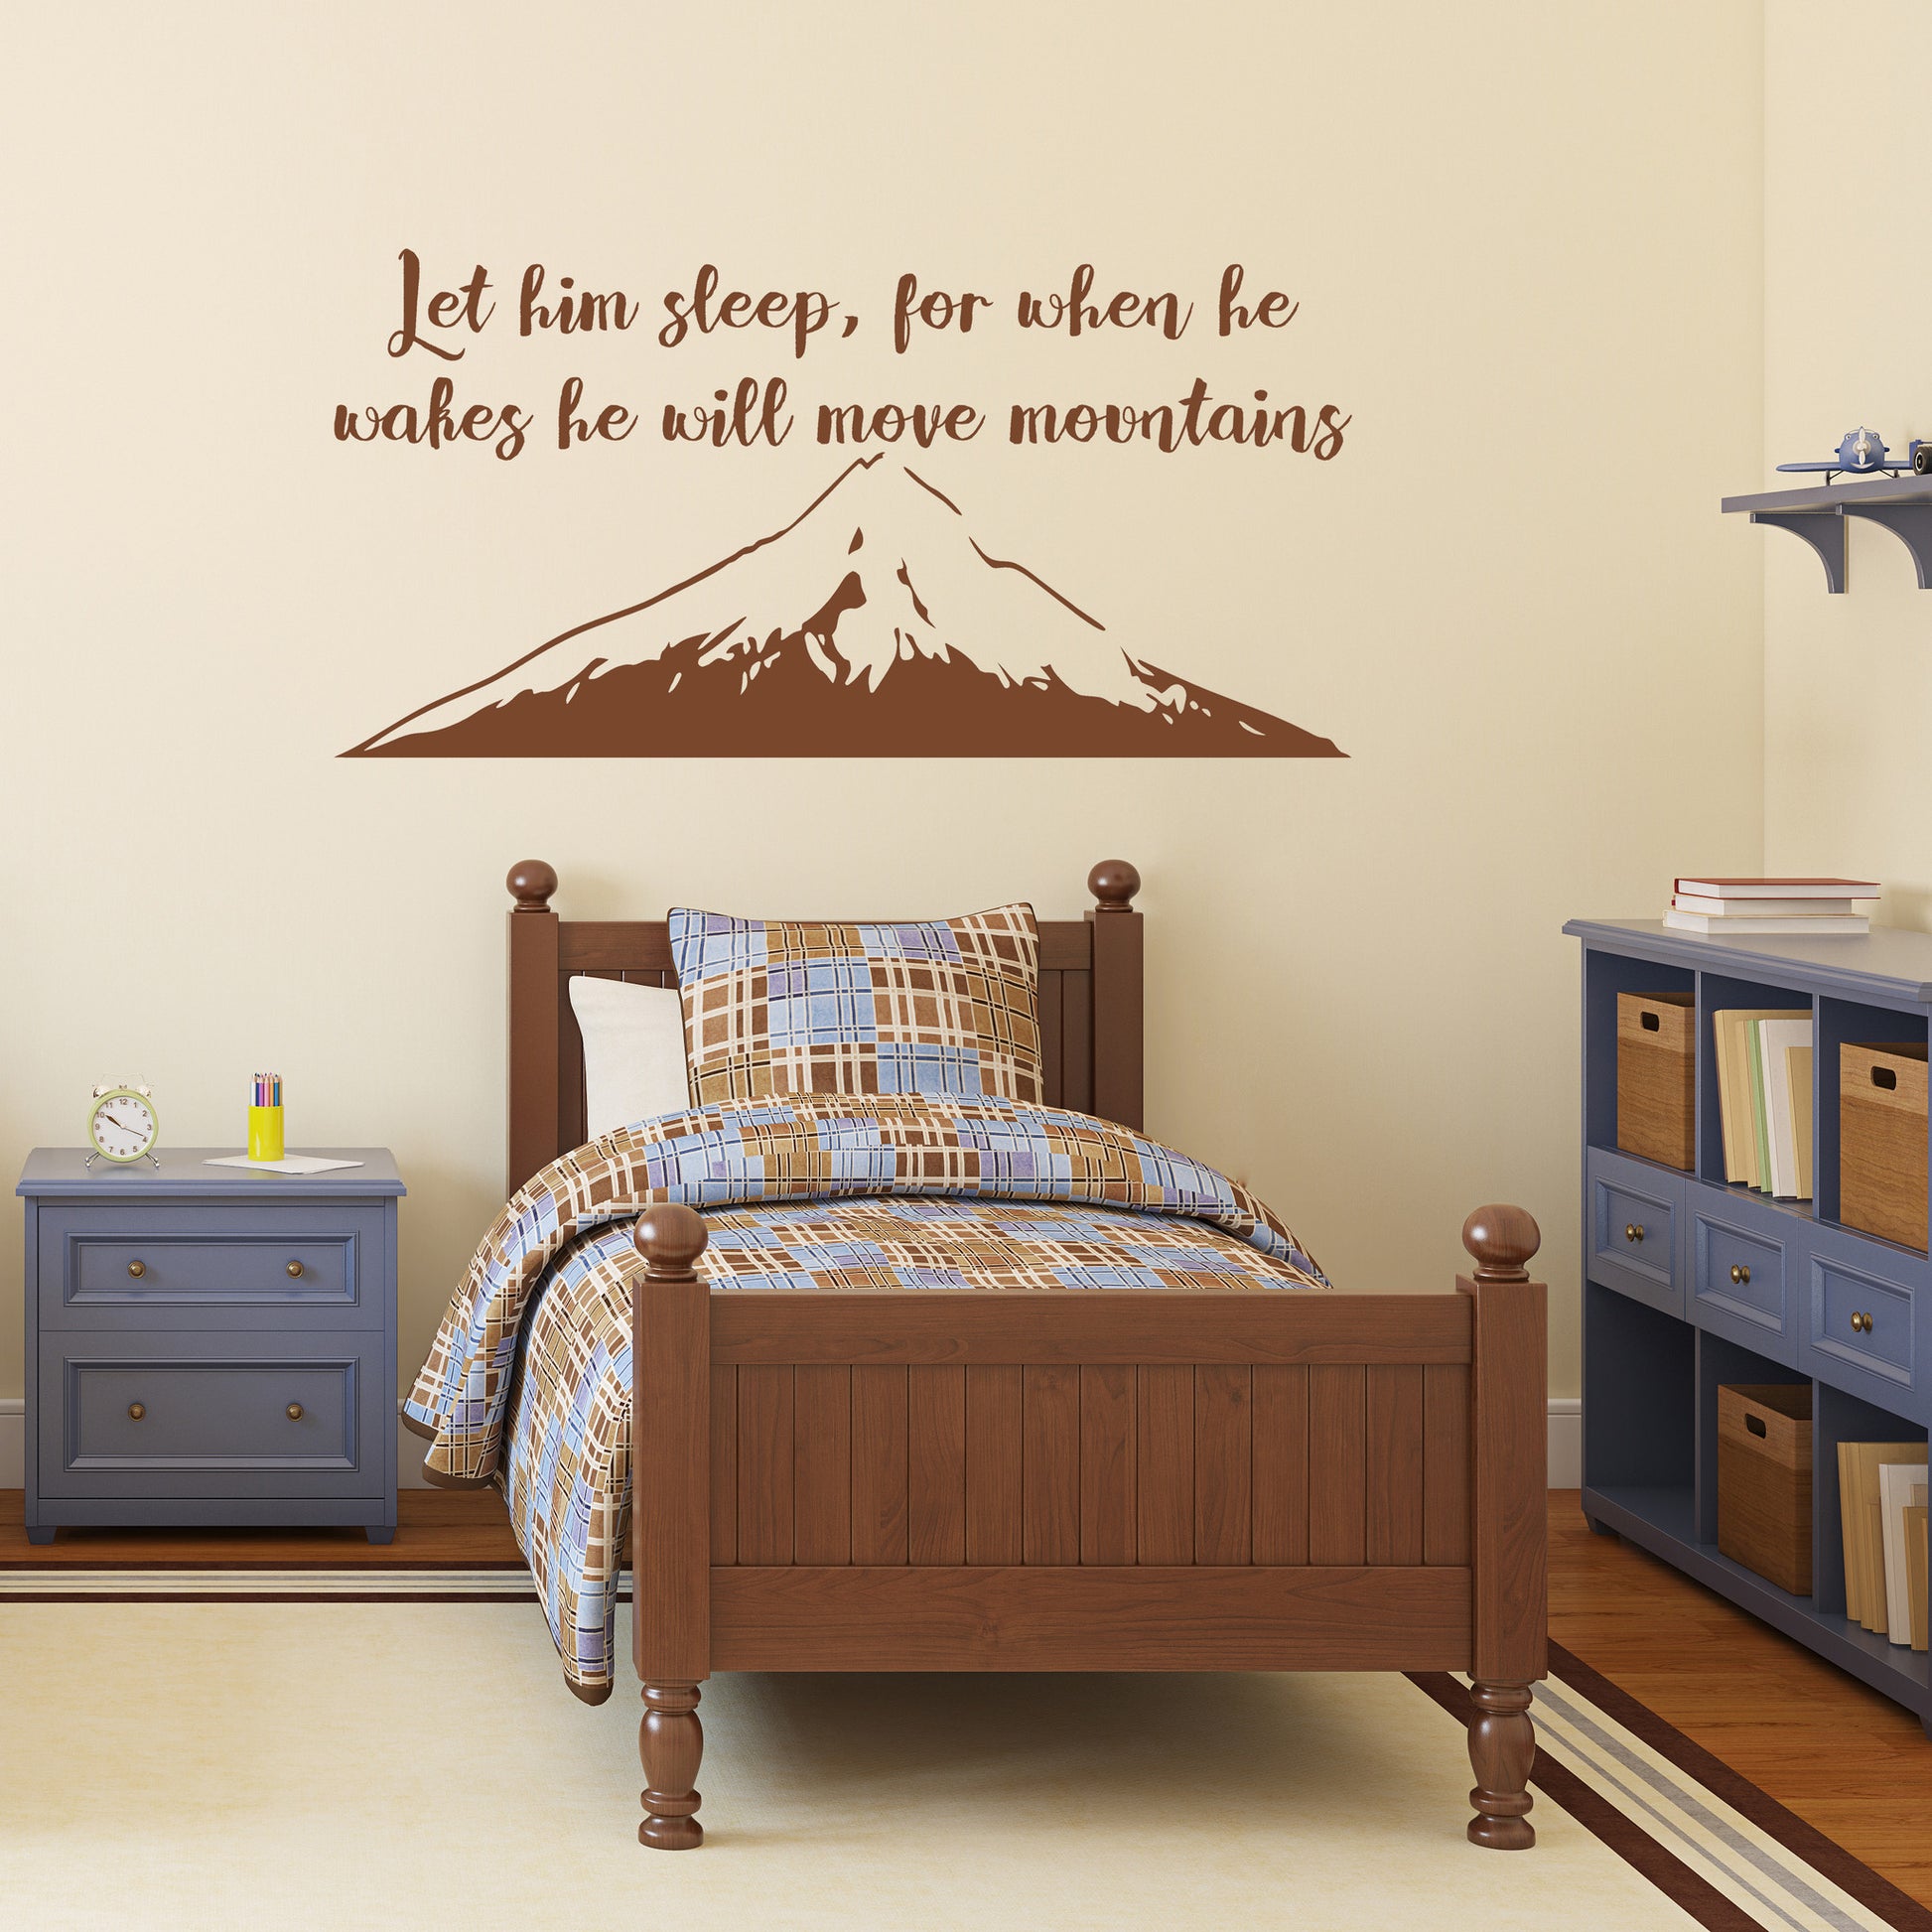 Let him sleep, for when he wakes he will move mountains | Wall quote - Adnil Creations